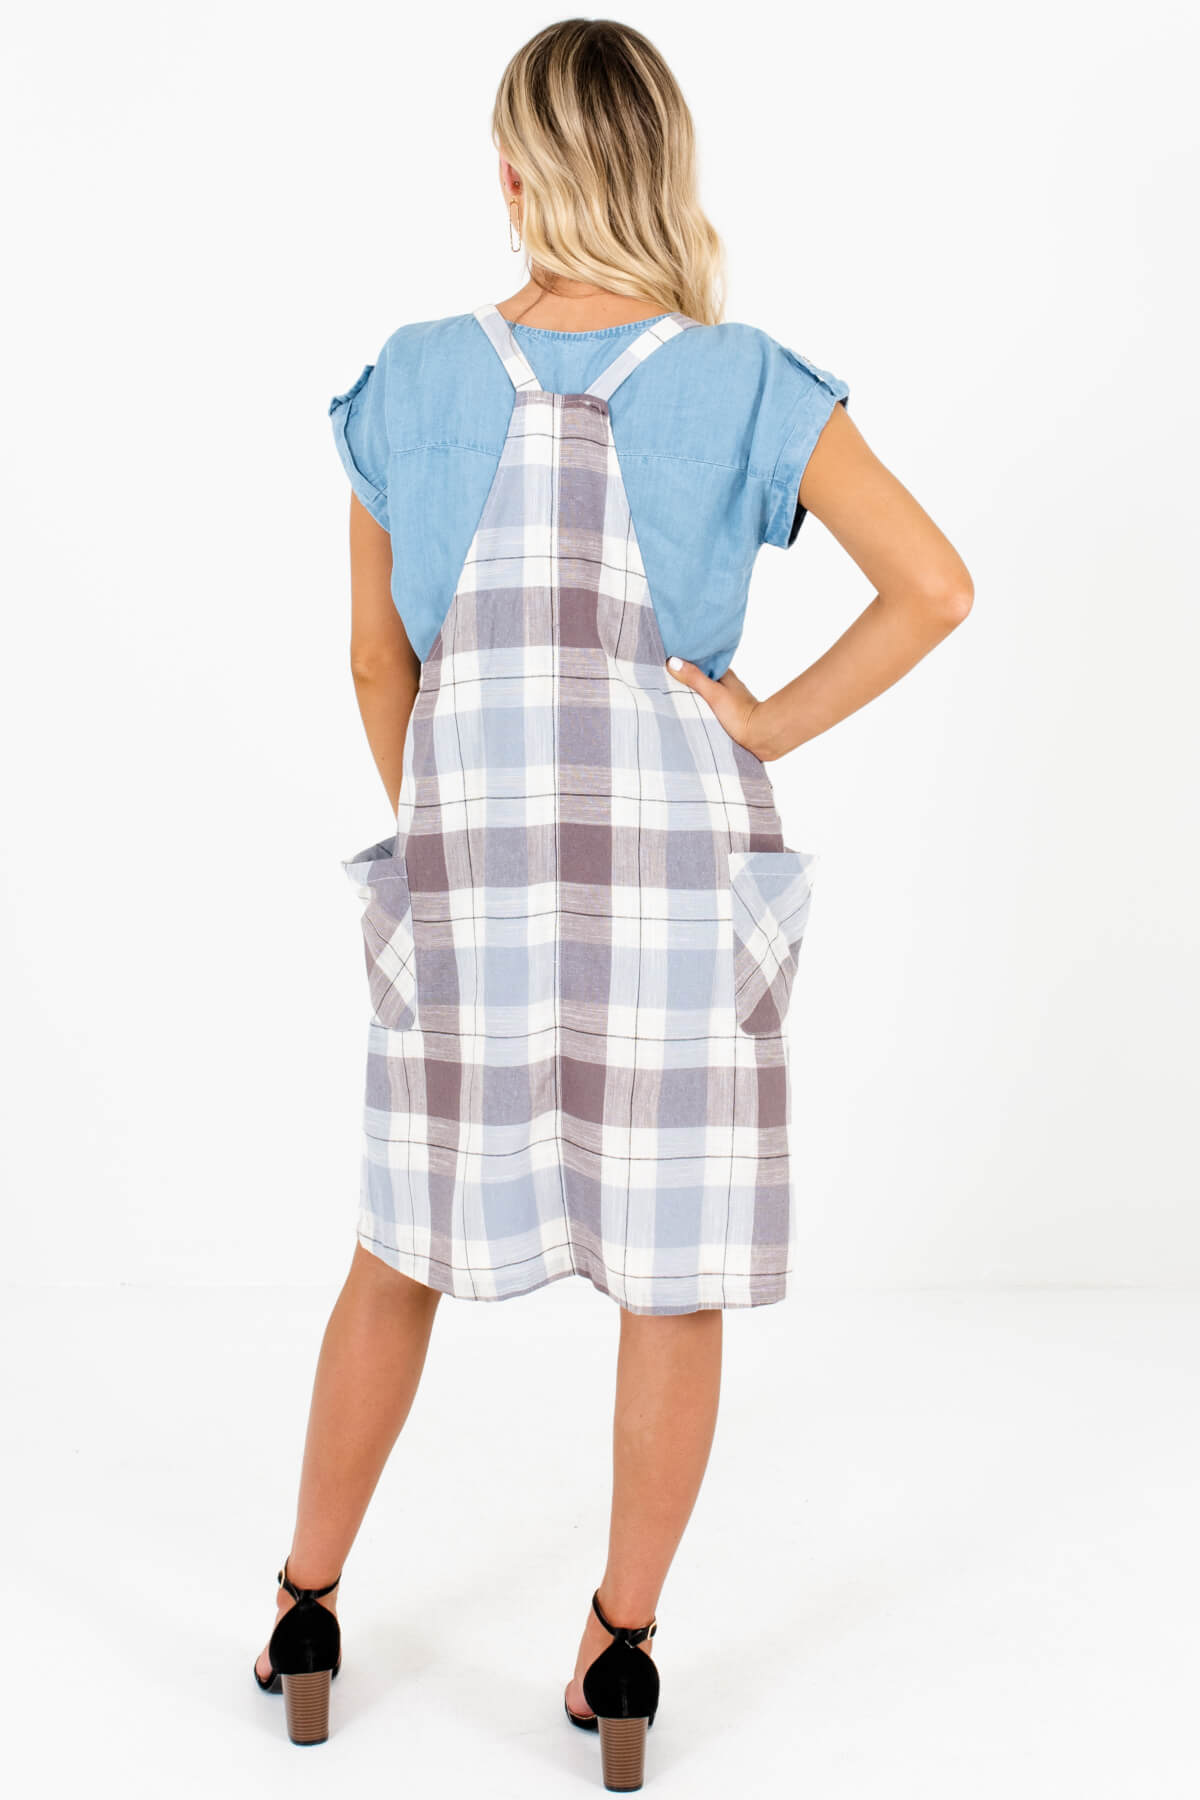 Blue Brown Cream Plaid Overall Dresses Affordable Online Boutique